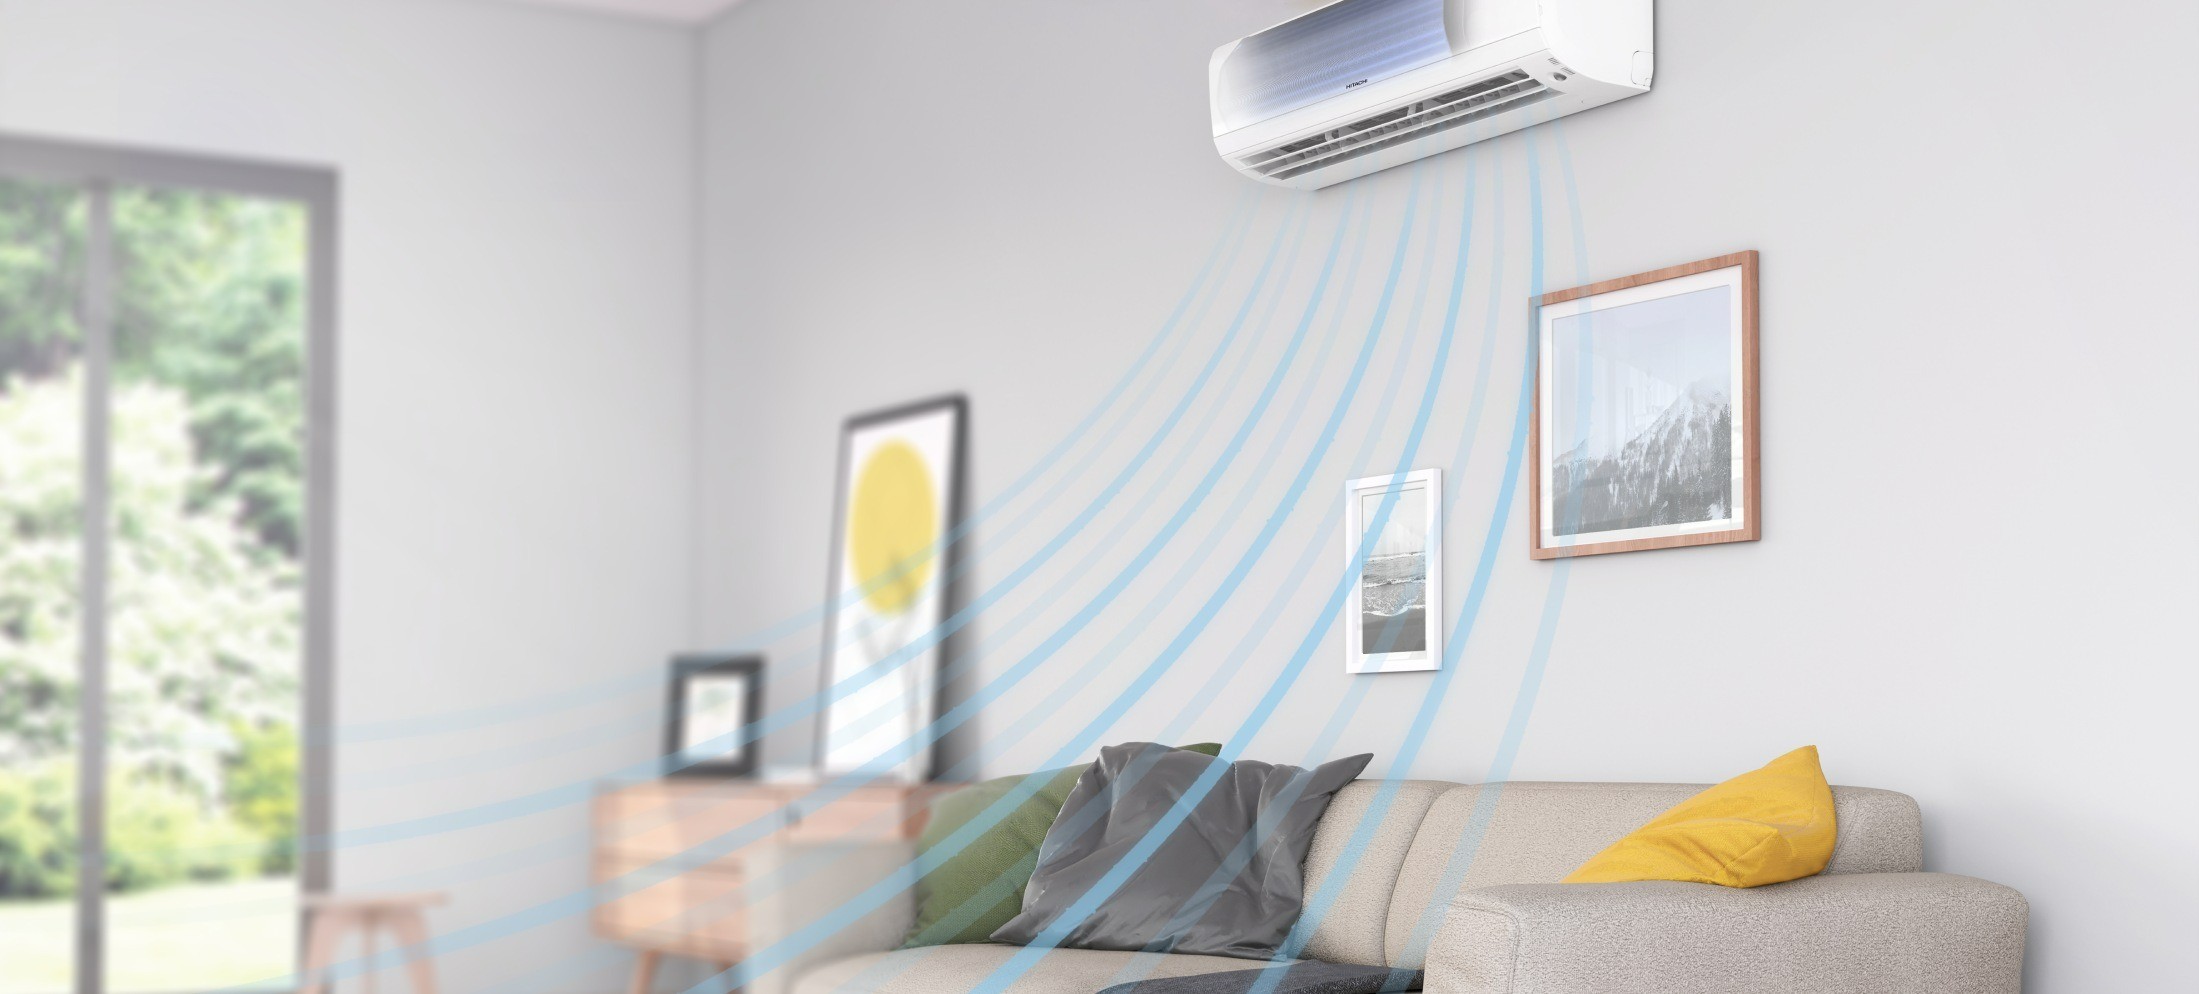 What Are the Benefits of a Split System Air Conditioner